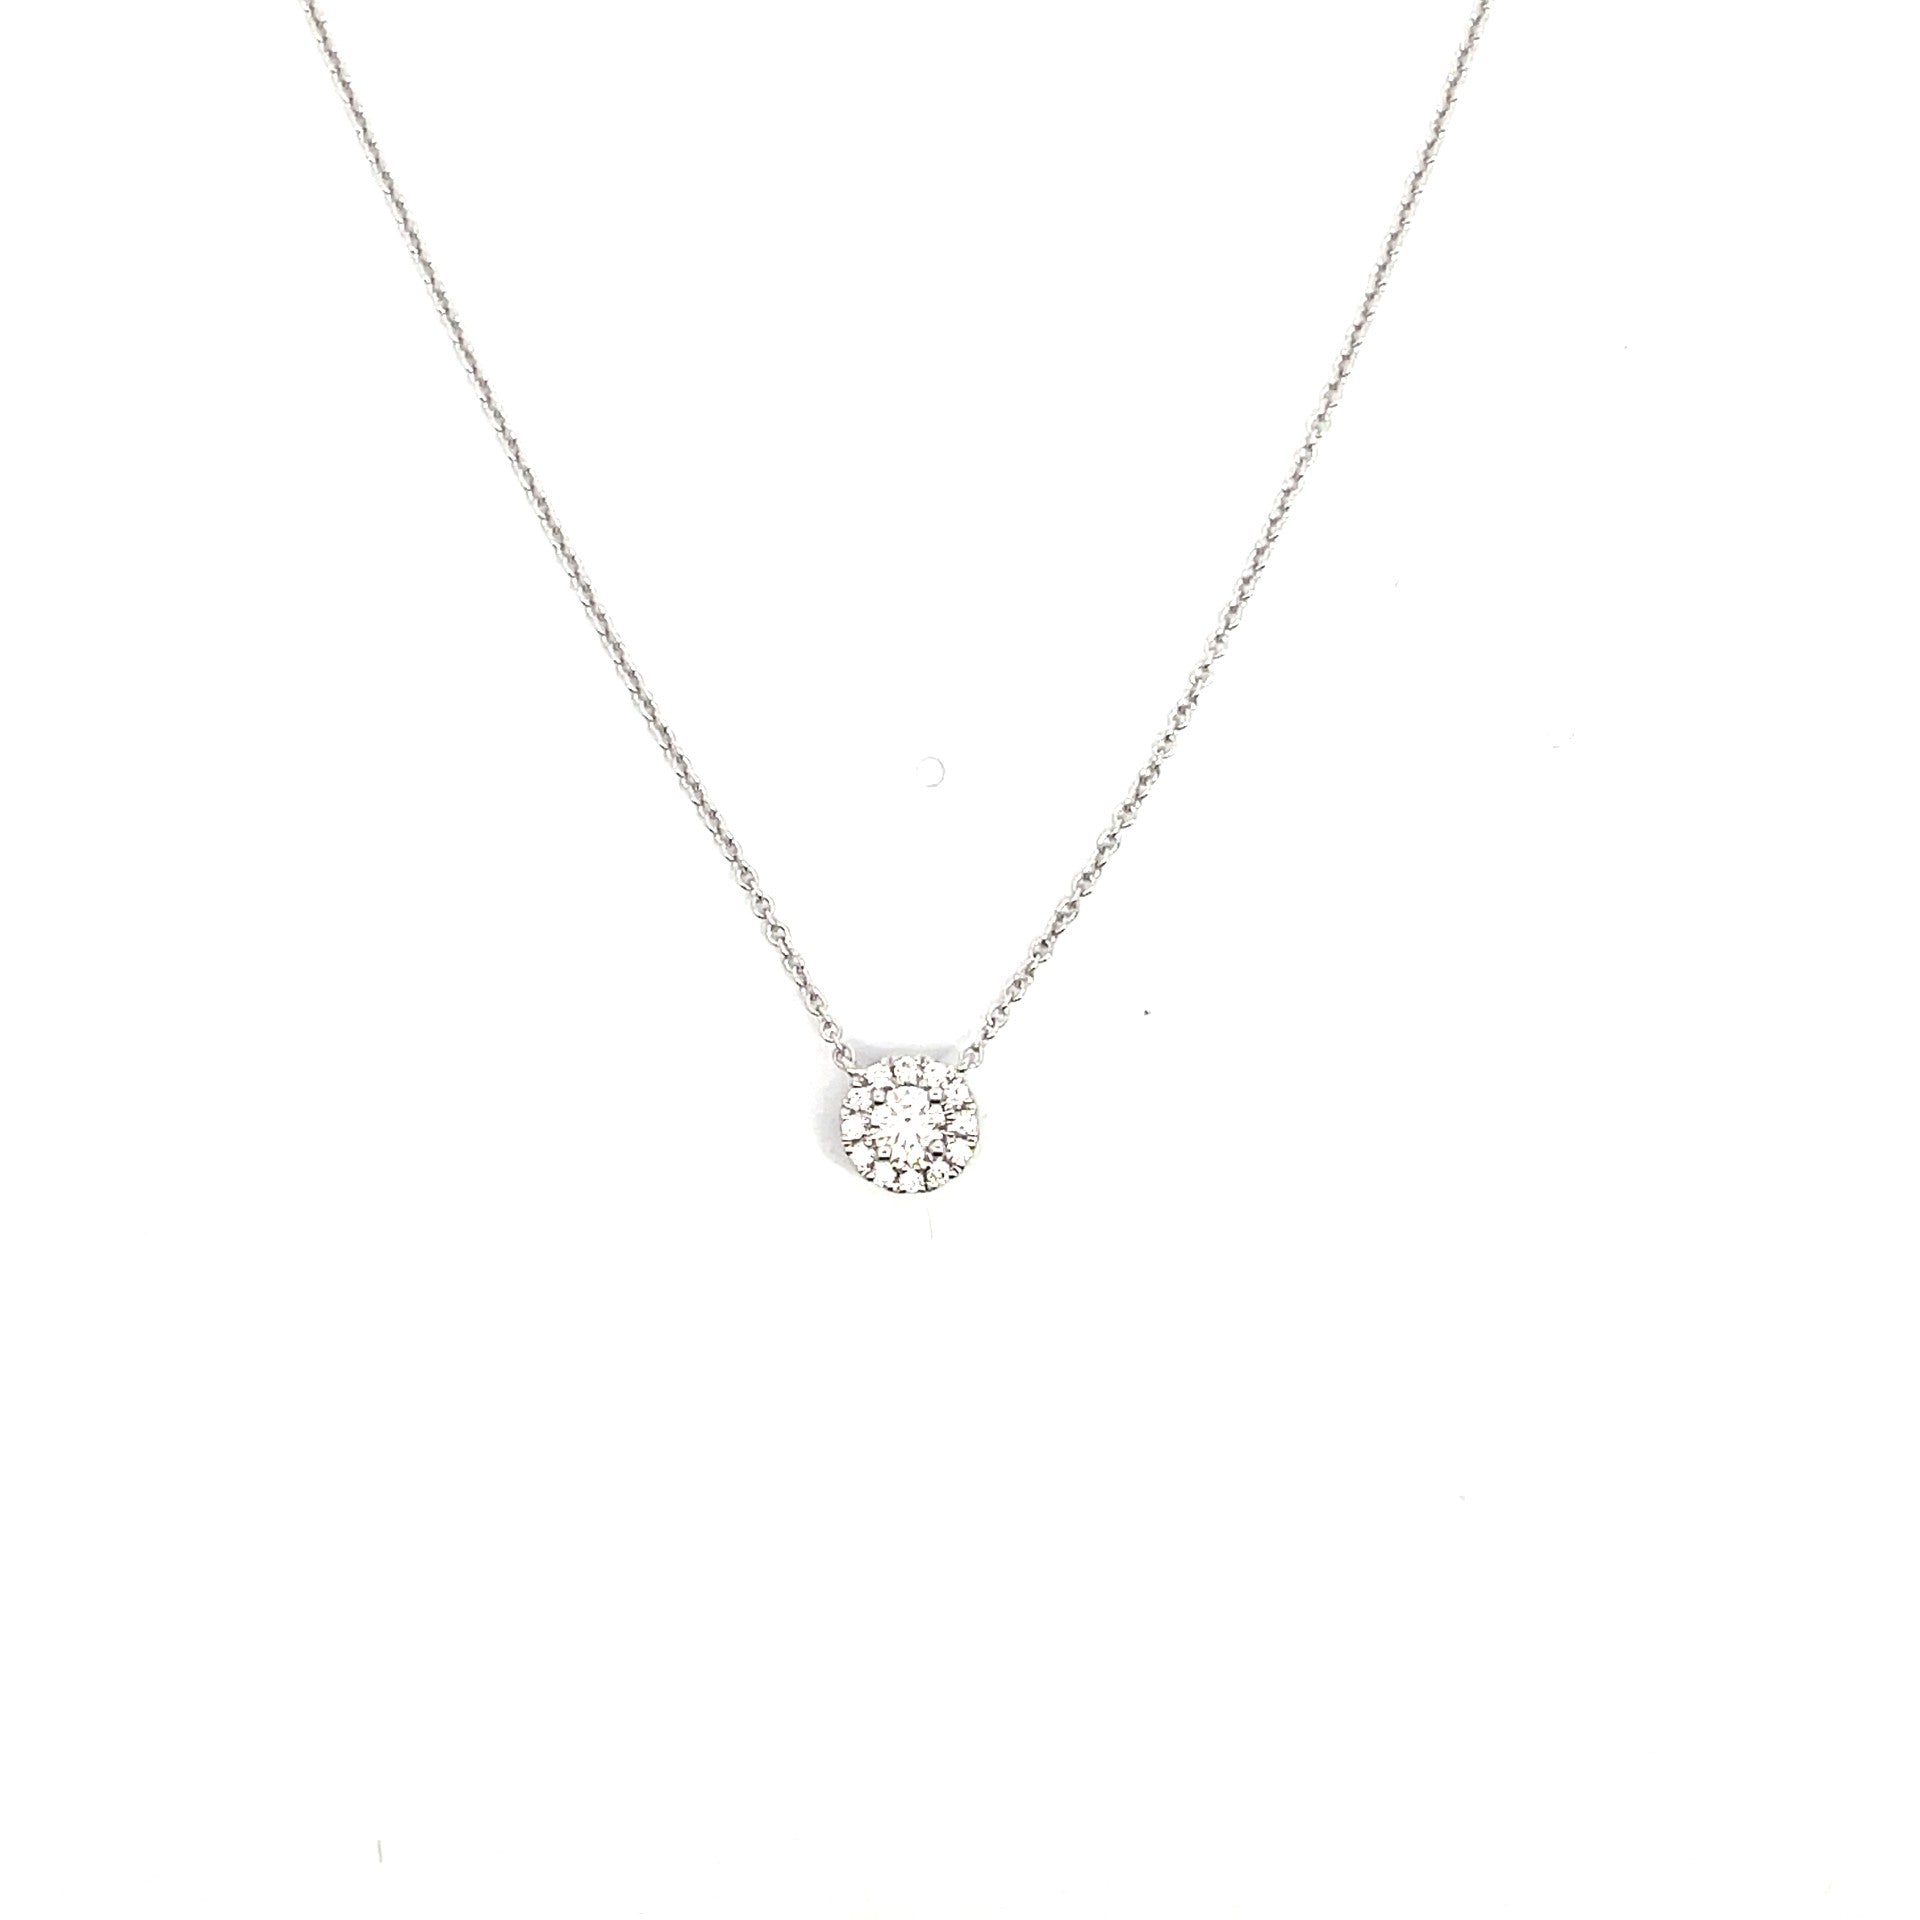 Diamond Pendant With Halo On Chain Necklace - Kelly Wade Jewelers Store